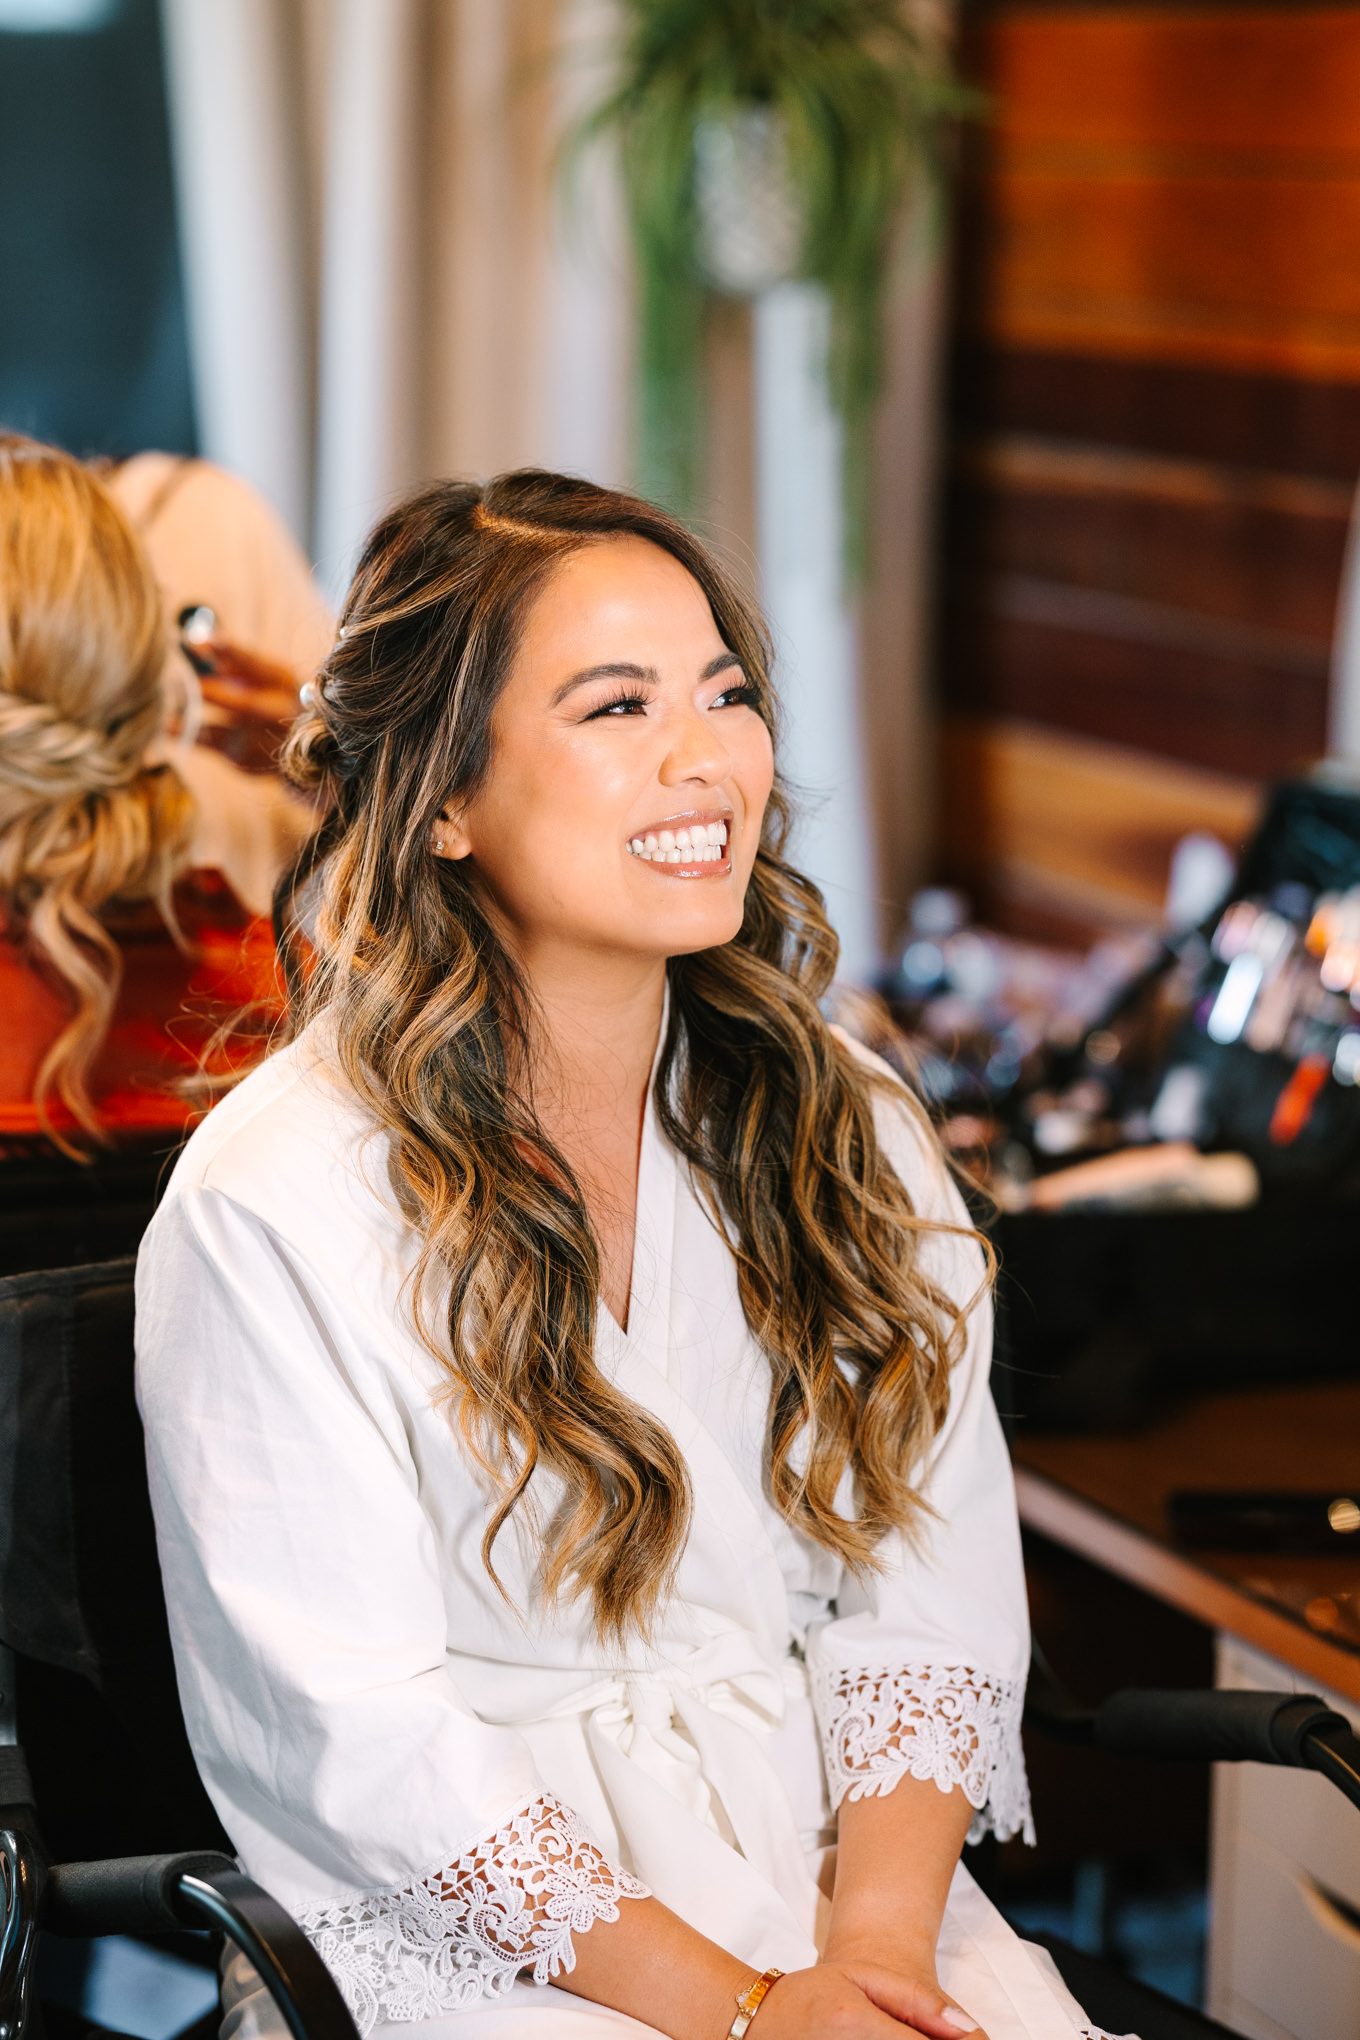 Bride getting ready | Pink and orange Lautner Compound wedding | Colorful Palm Springs wedding photography | #palmspringsphotographer #palmspringswedding #lautnercompound #southerncaliforniawedding  Source: Mary Costa Photography | Los Angeles